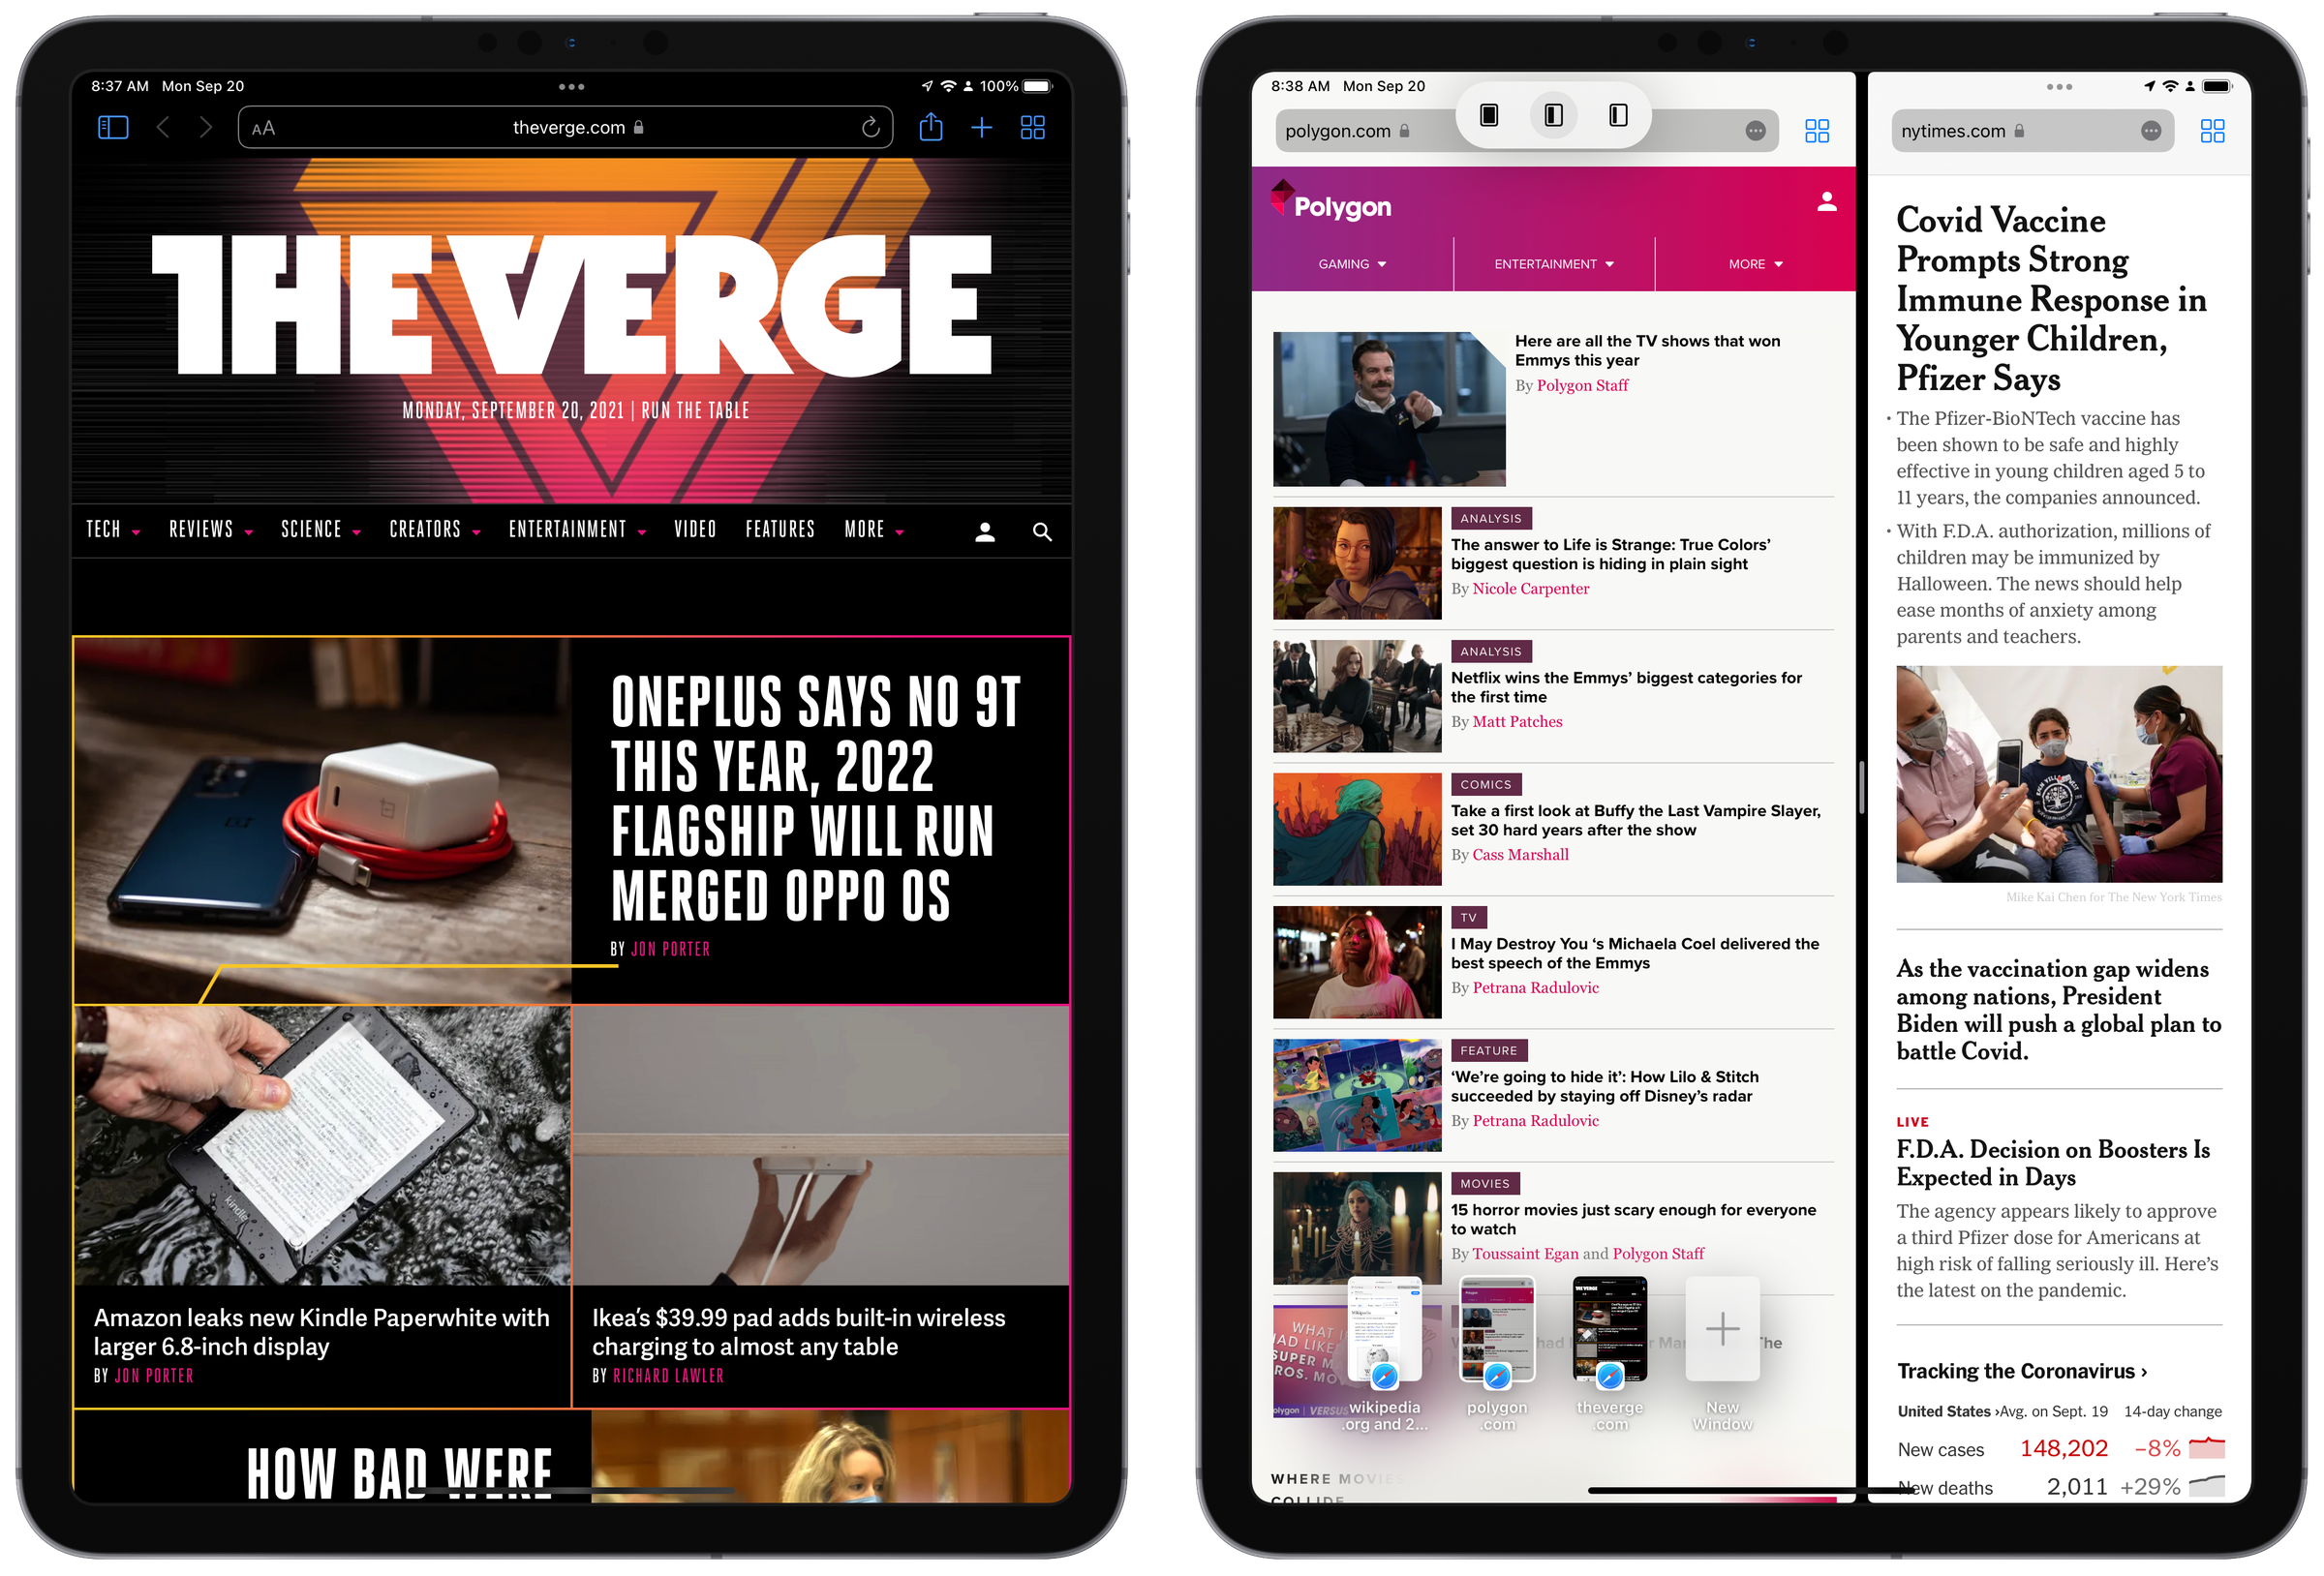 The updated Safari on iOS 15, along with a look at the new multitasking bar and shelf view.